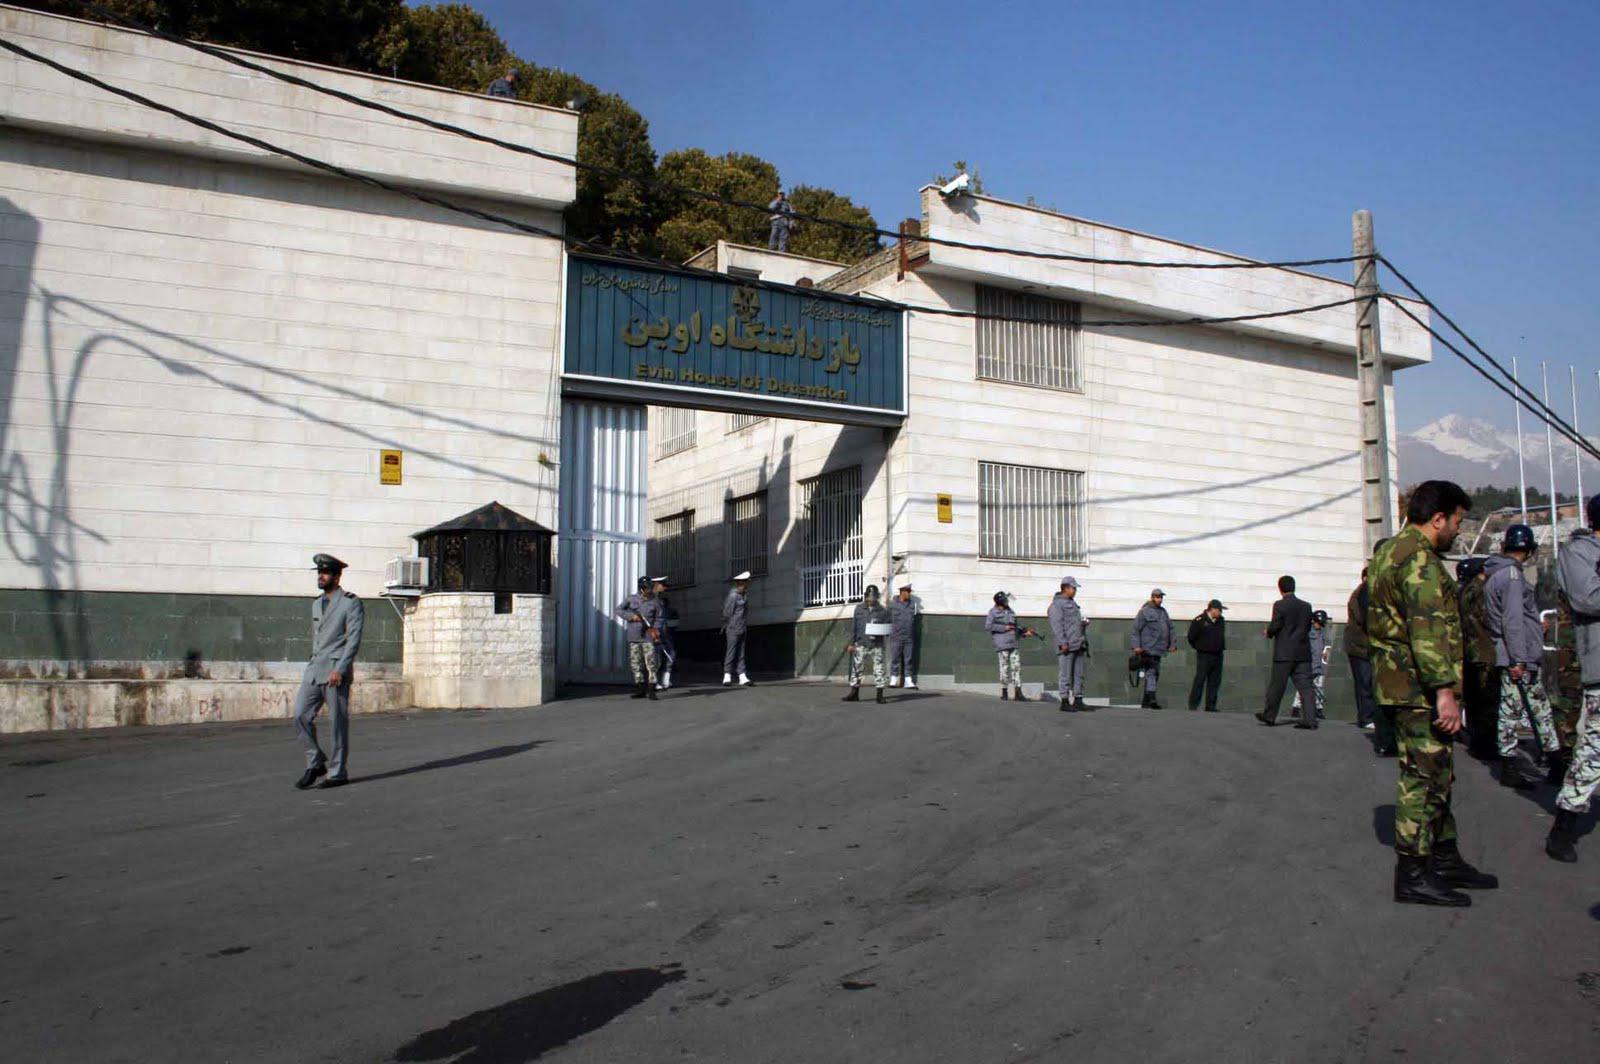 Exterior view of Evin prison